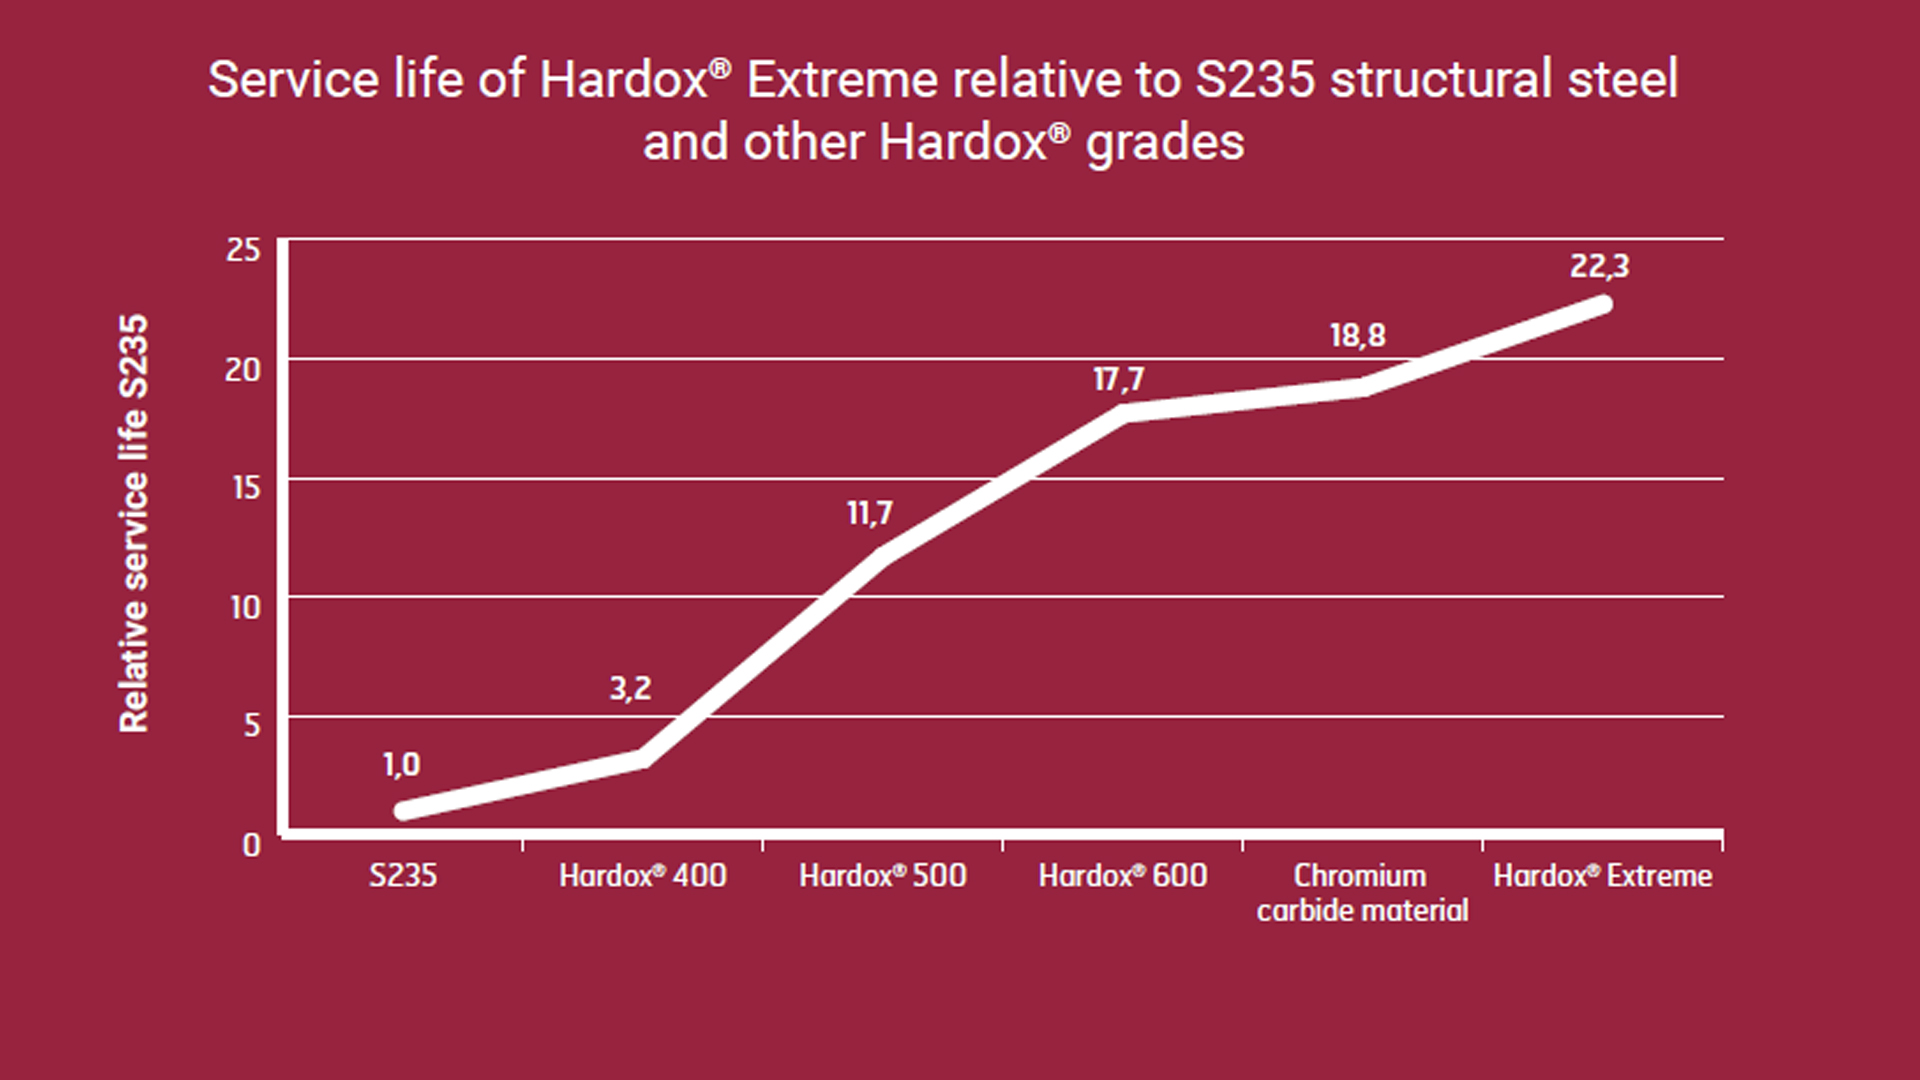 Service life of Hardox Extreme relative to structural steel and other Hardox grades